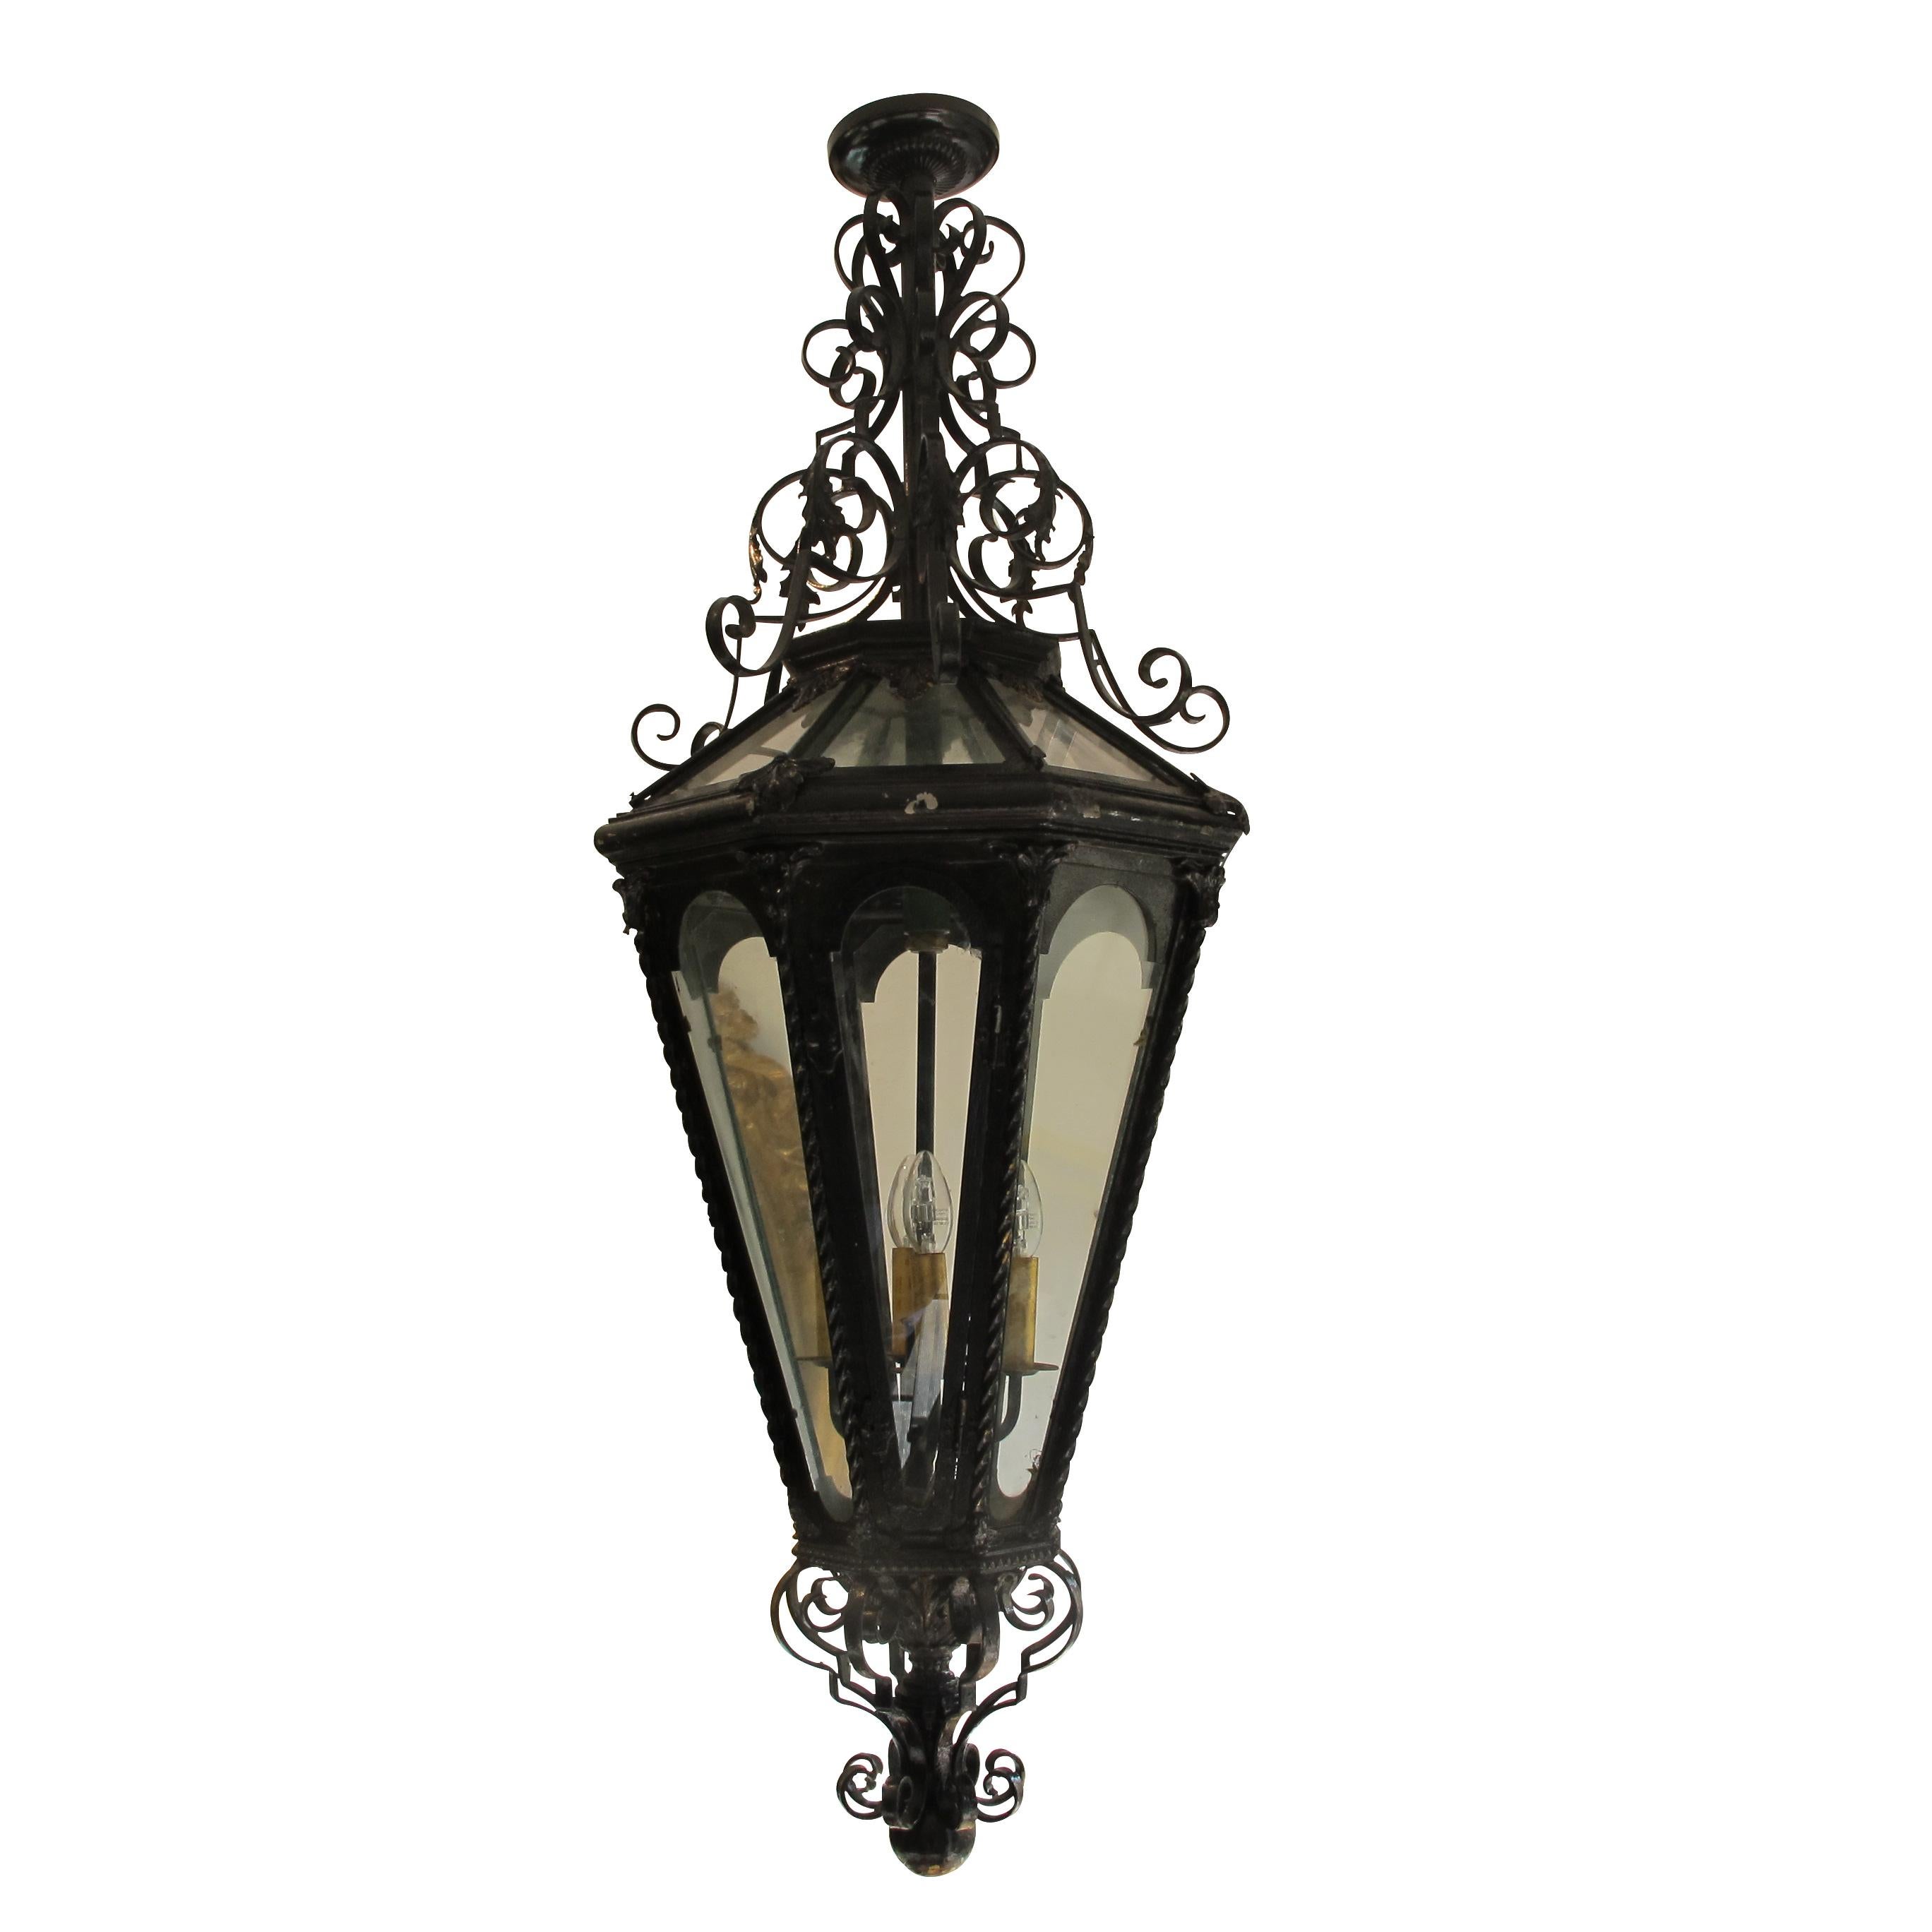 This is a very large black-painted wrought iron French lantern circa 1950s. The lantern holds 4 light fittings accessible through one of the facet-mounted door. The lantern is highly decorative with ample forged scrolls with generous curves and